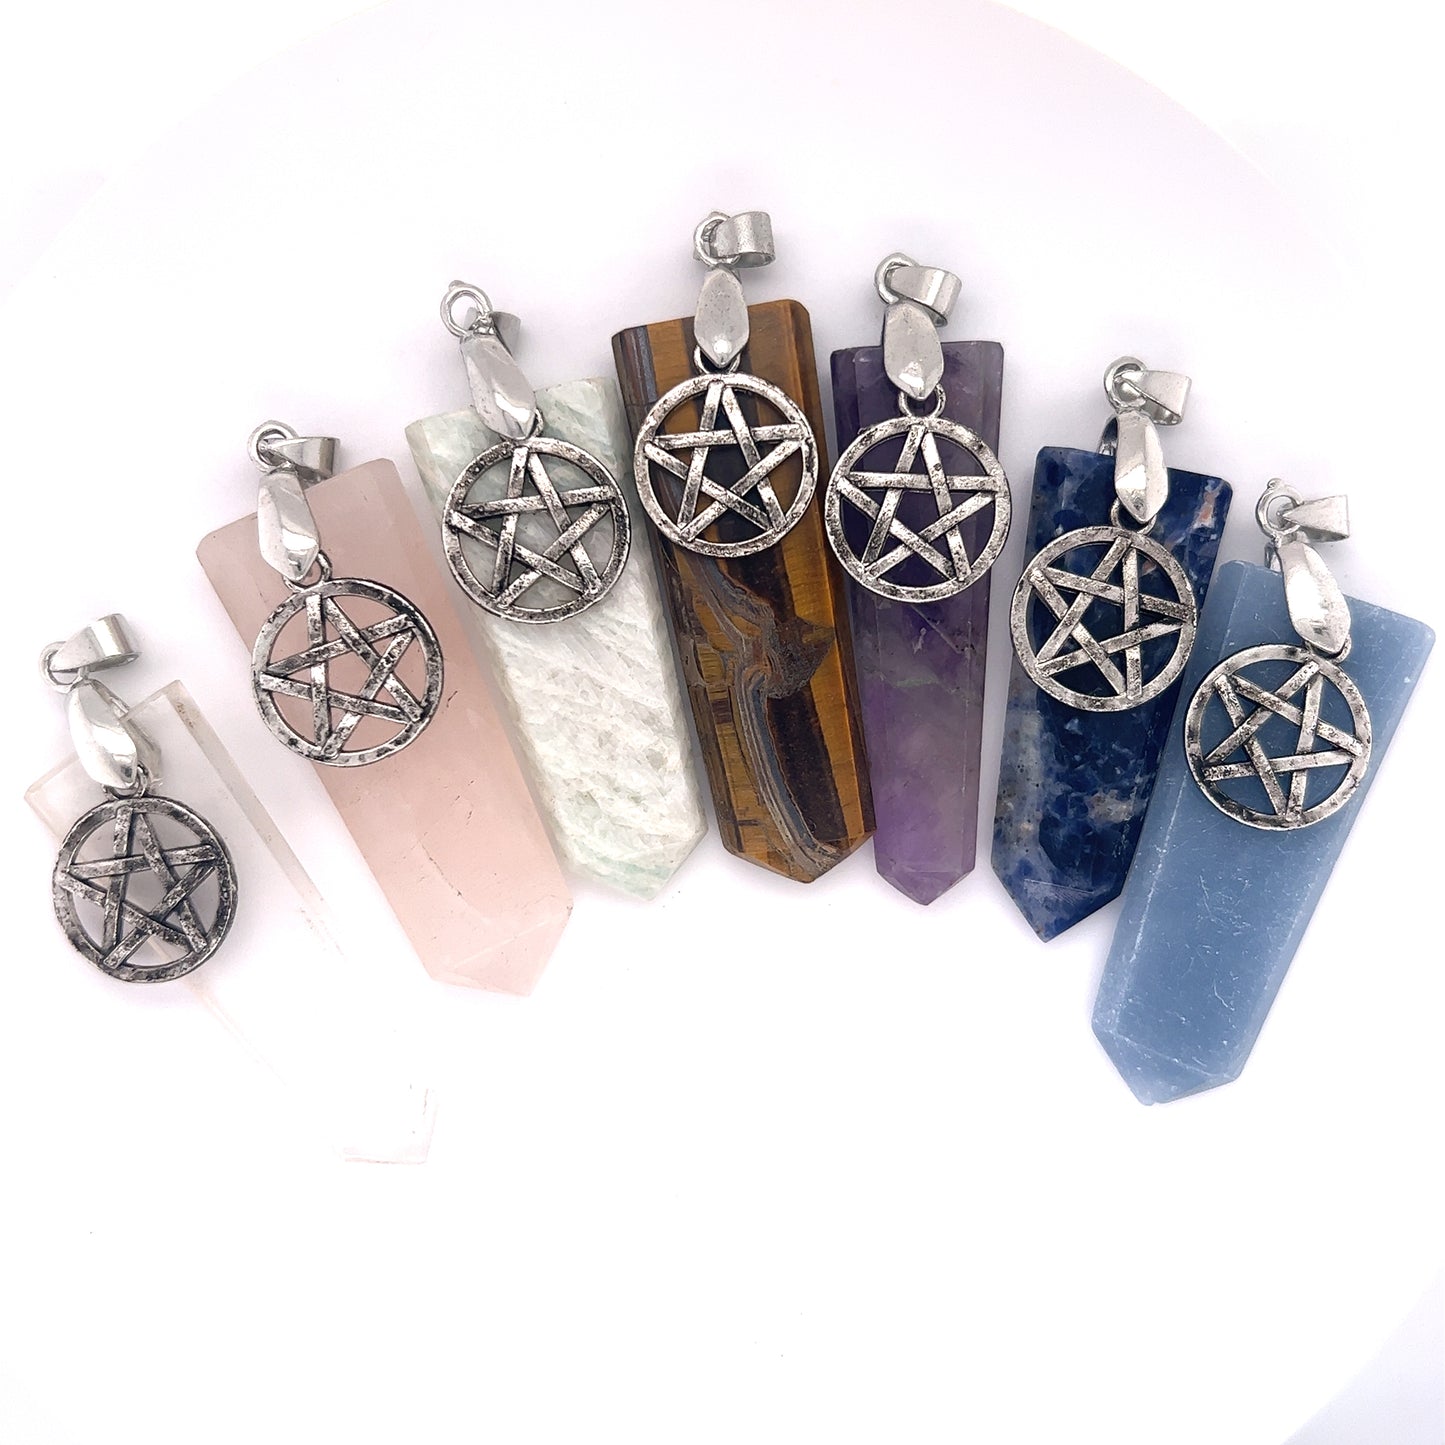 Five Super Silver Pentagram Stone Slab Pendants, featuring a variety of stones, displayed on a white background.